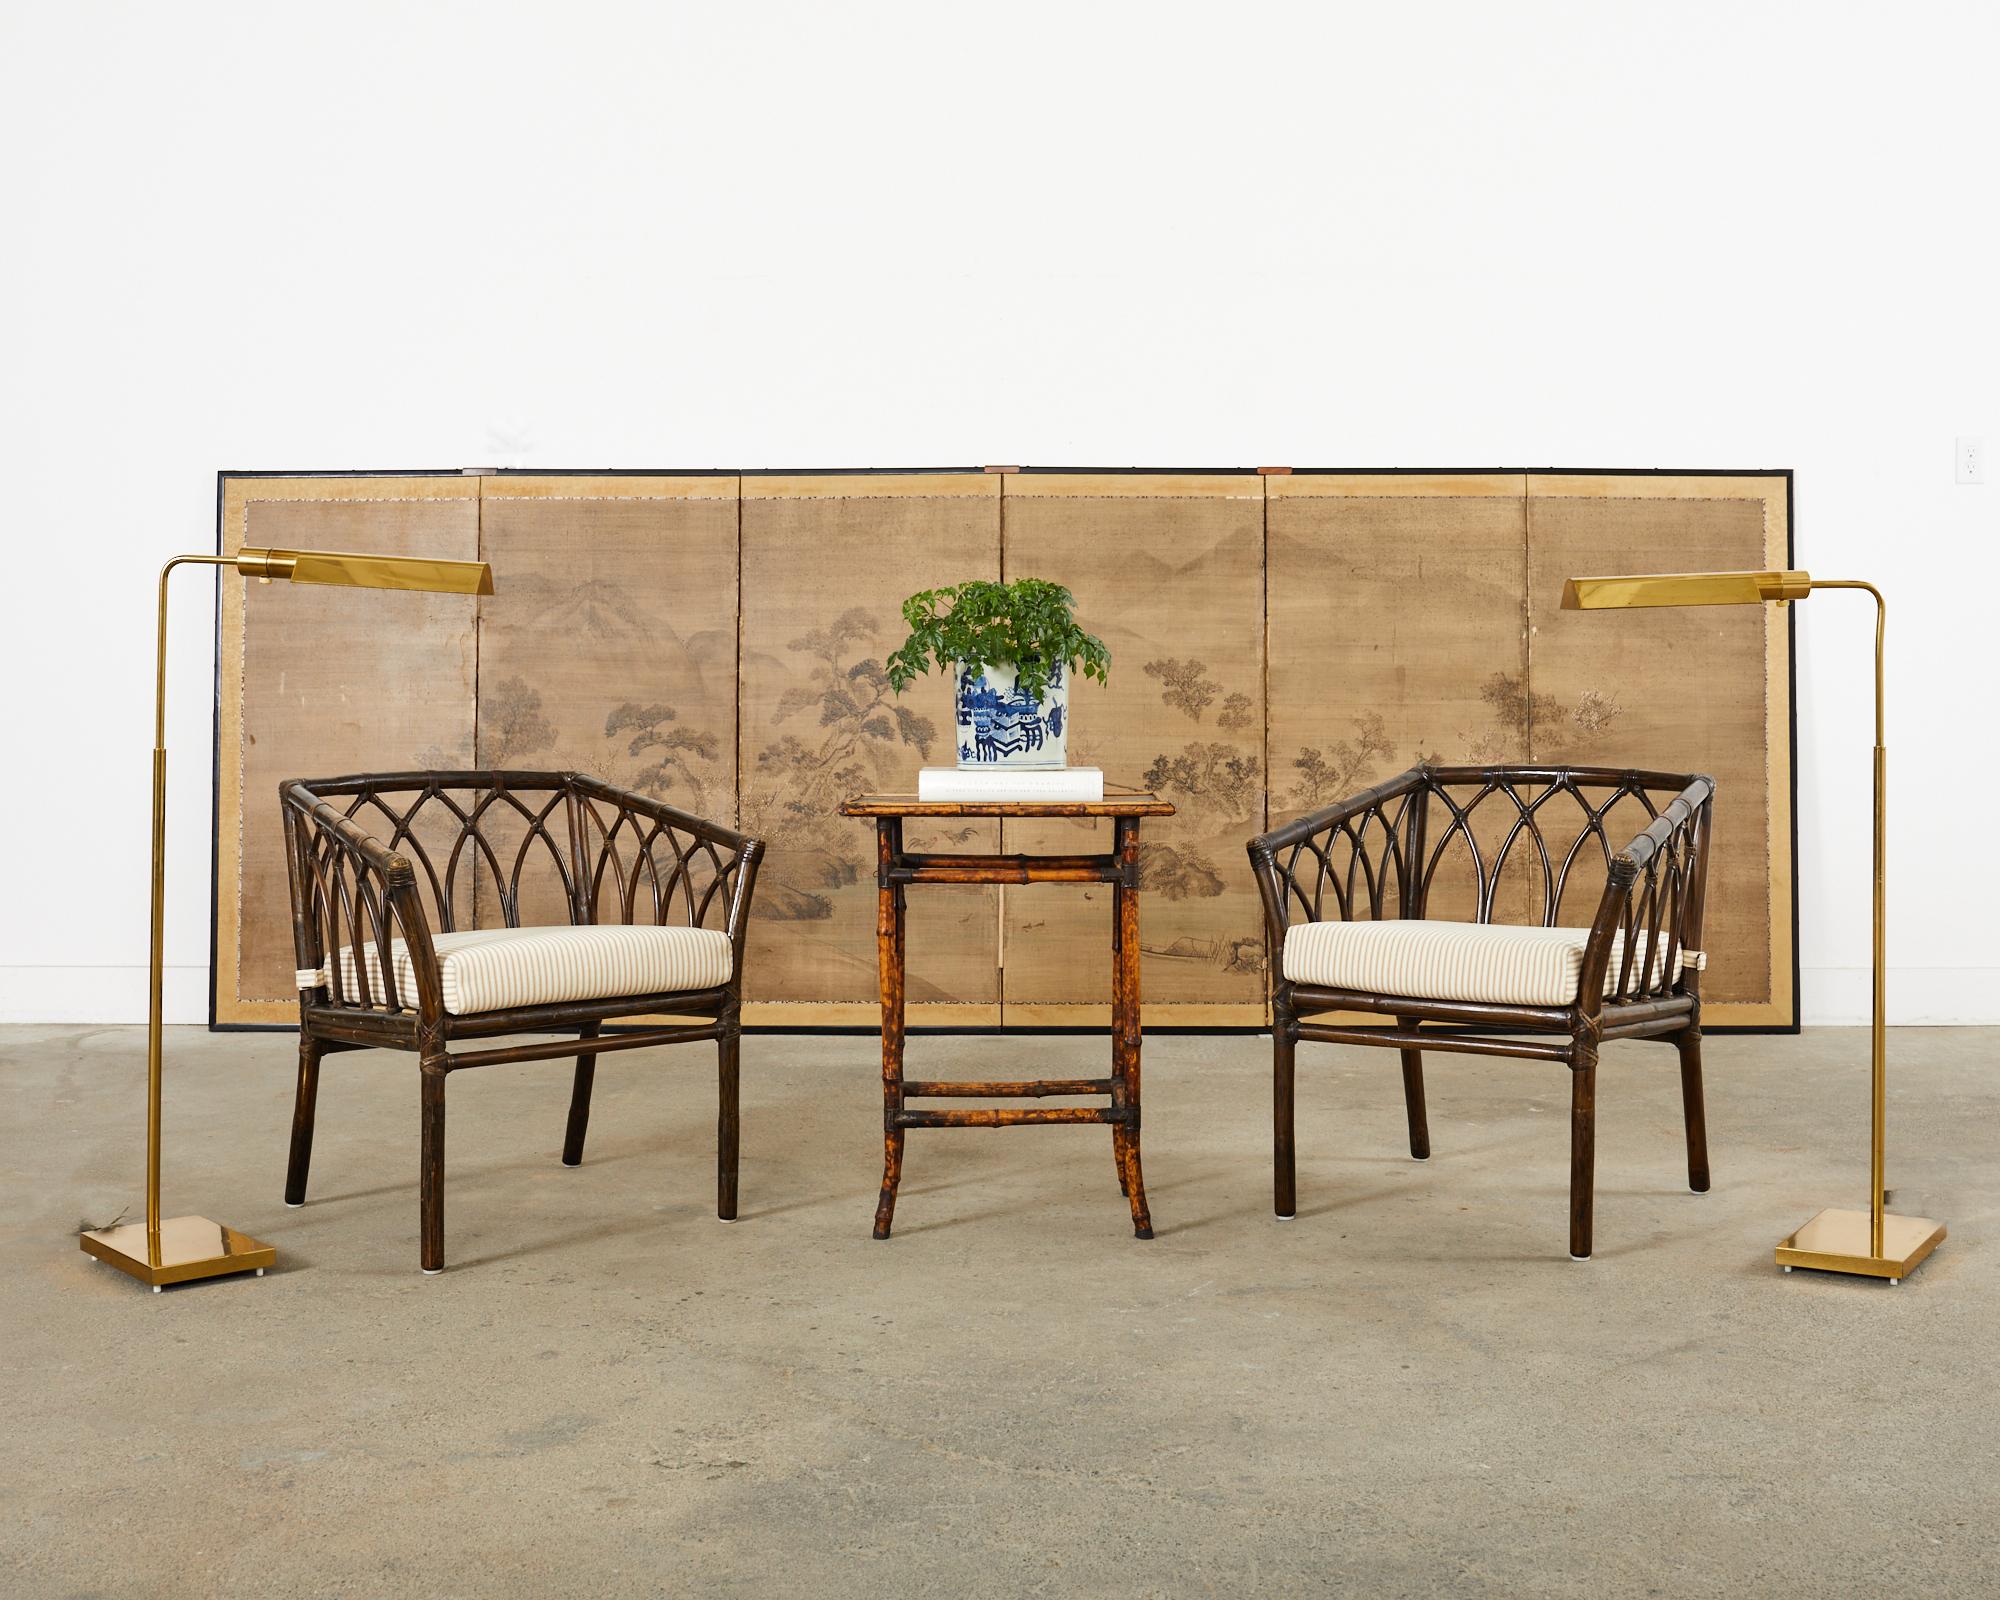 Handsome pair of organic modern armchairs or lounge chairs made by McGuire. The chairs feature rattan pole frames having a gothic lancet arch cathedral design on the back and sides. The chairs have a dramatic profile with newly upholstered seat